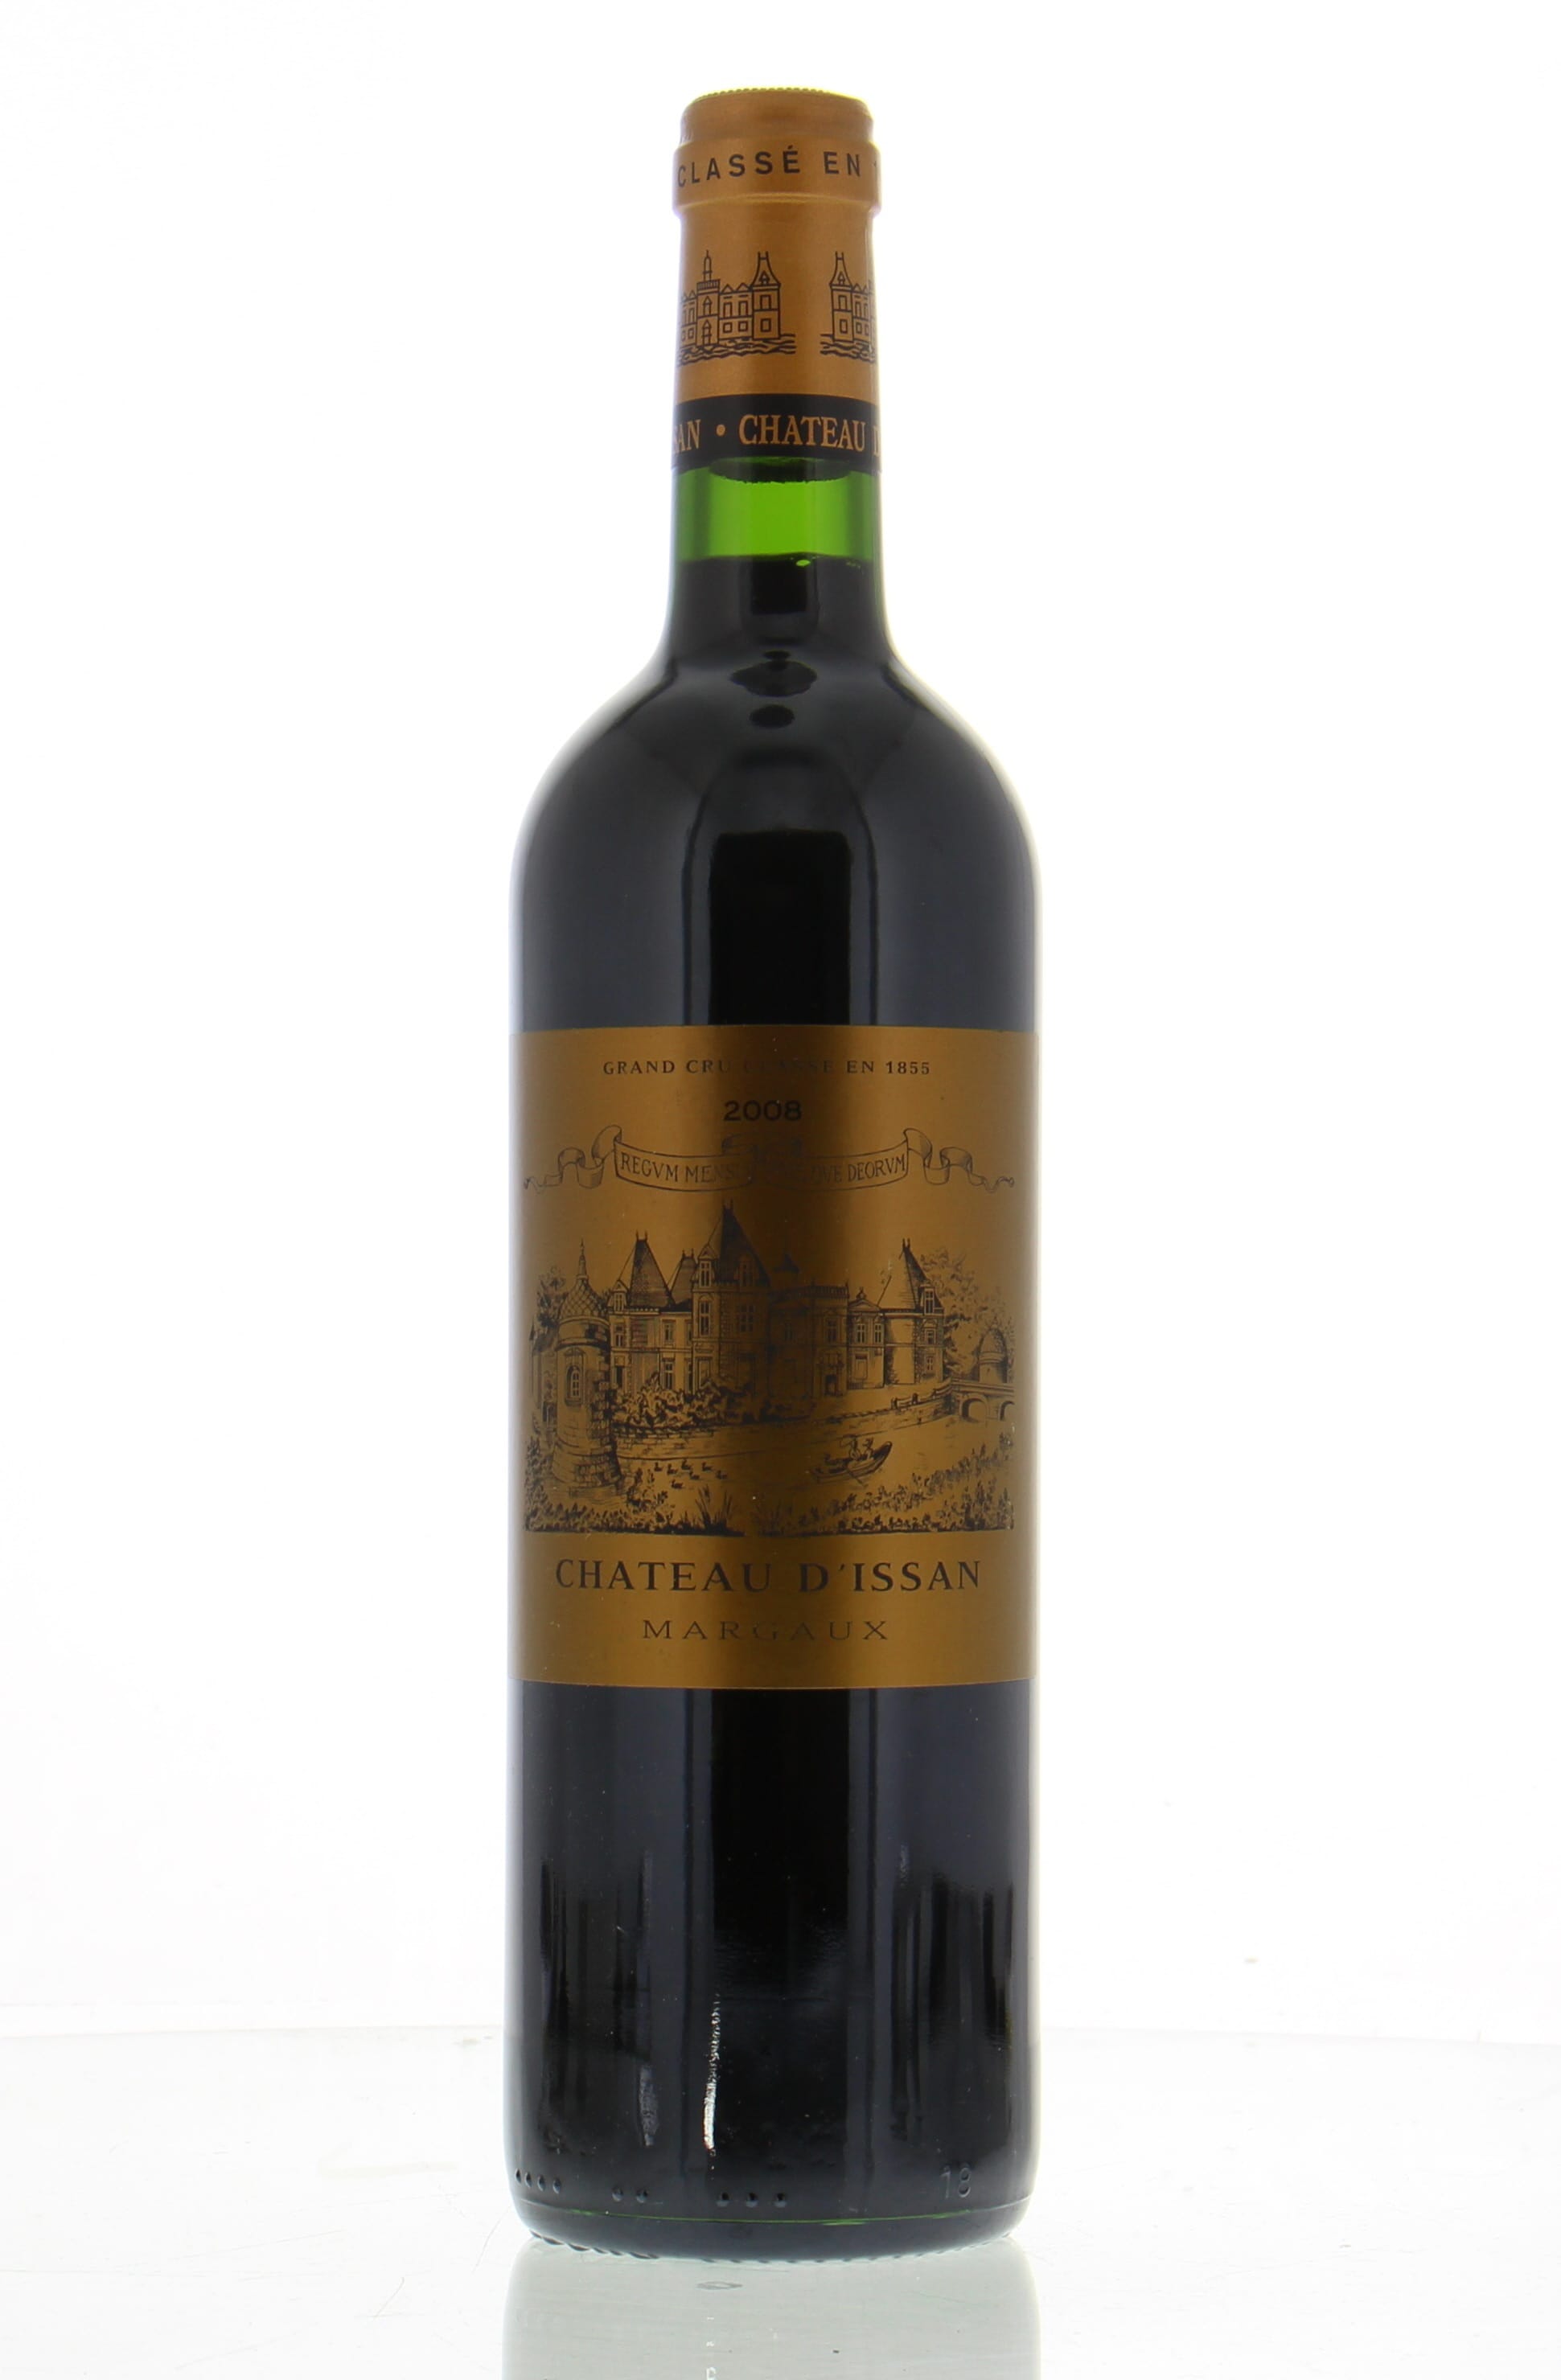 Chateau D'Issan - Chateau D'Issan 2008 perfect